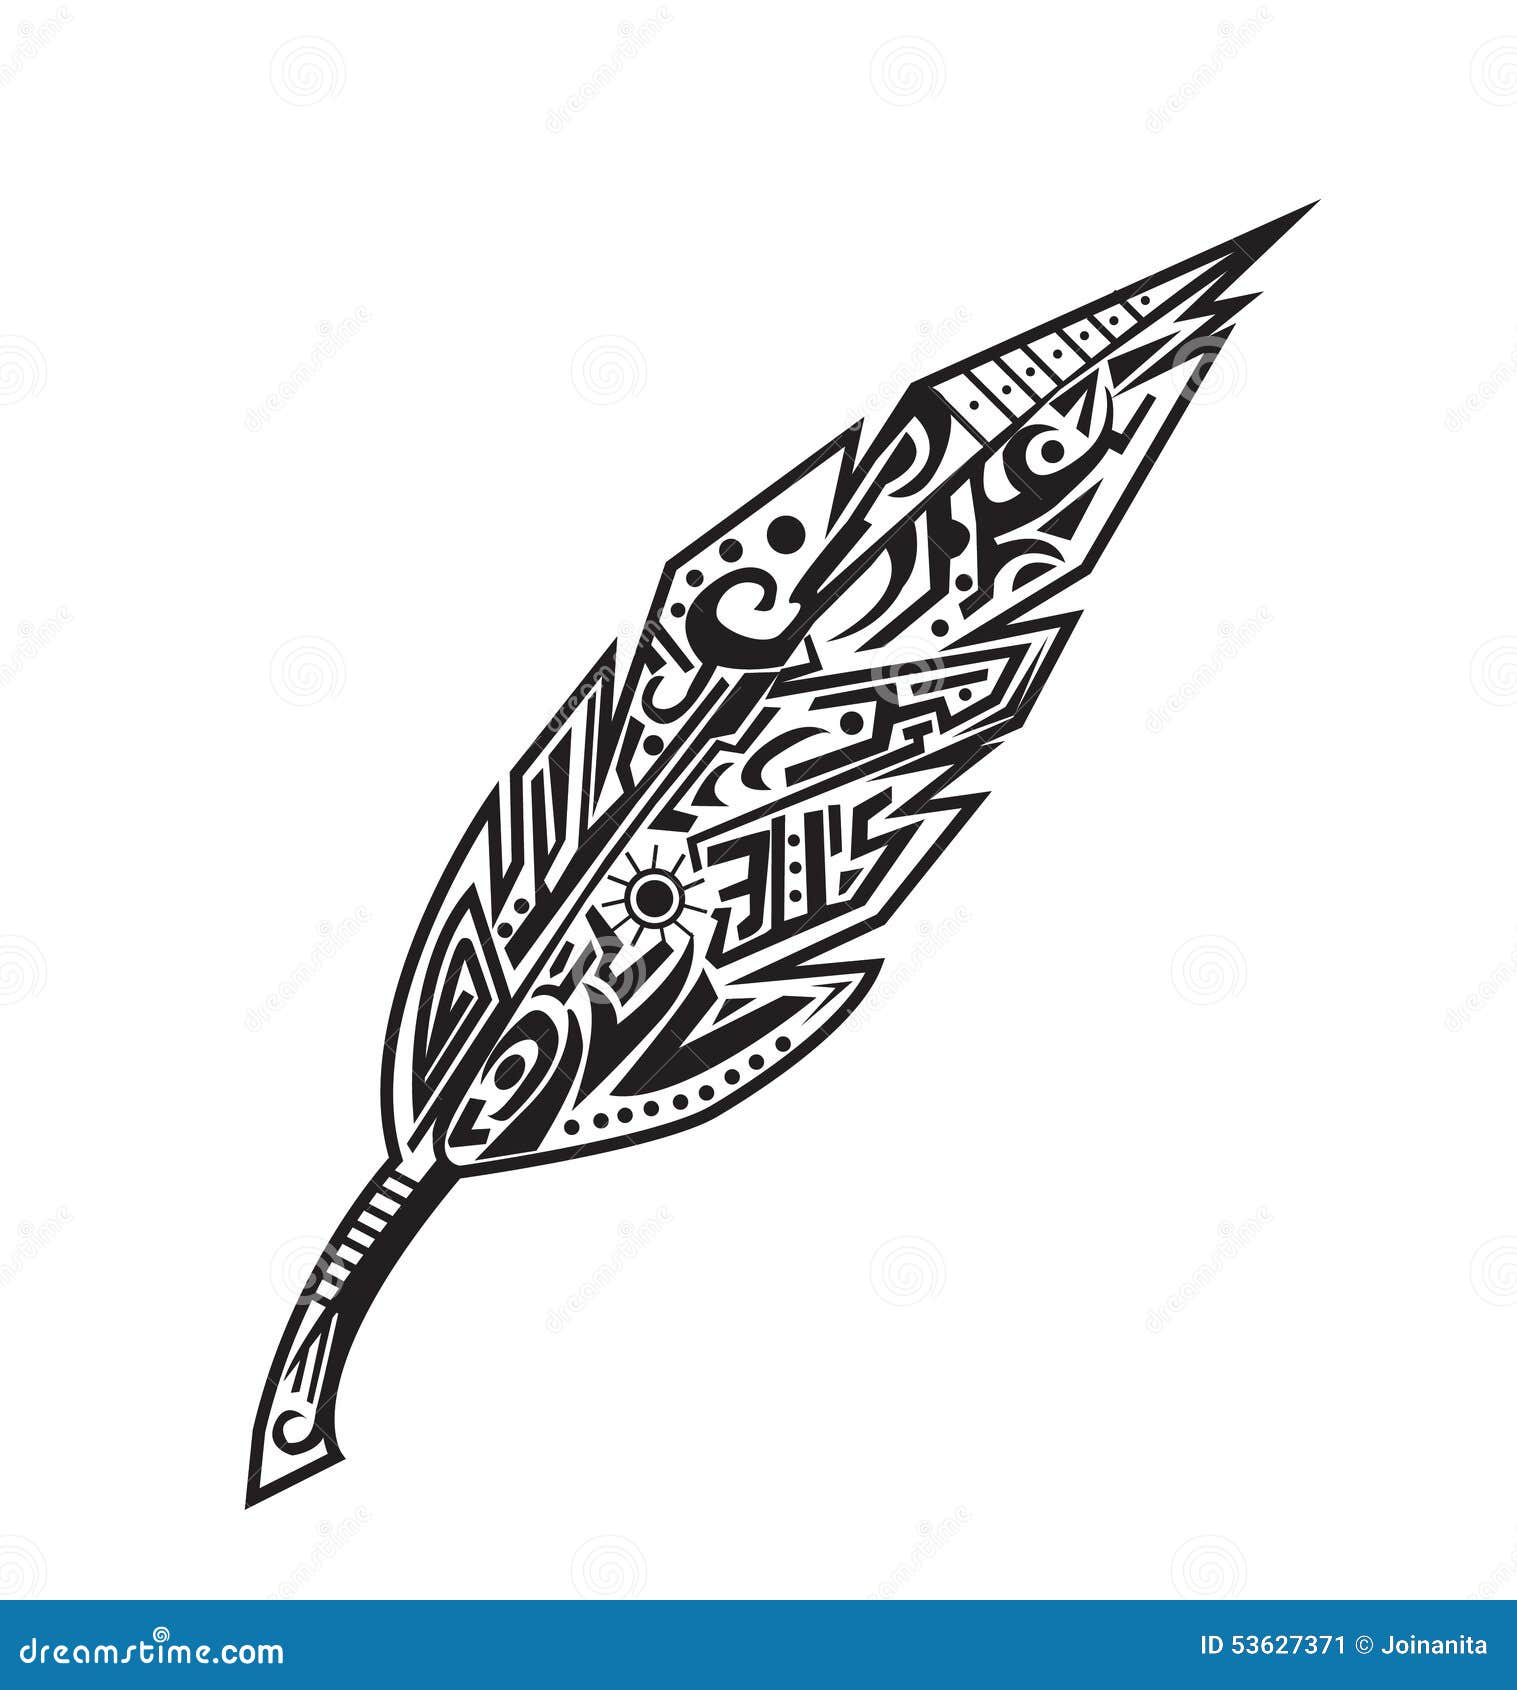 Black and white feather tattoo design on Craiyon